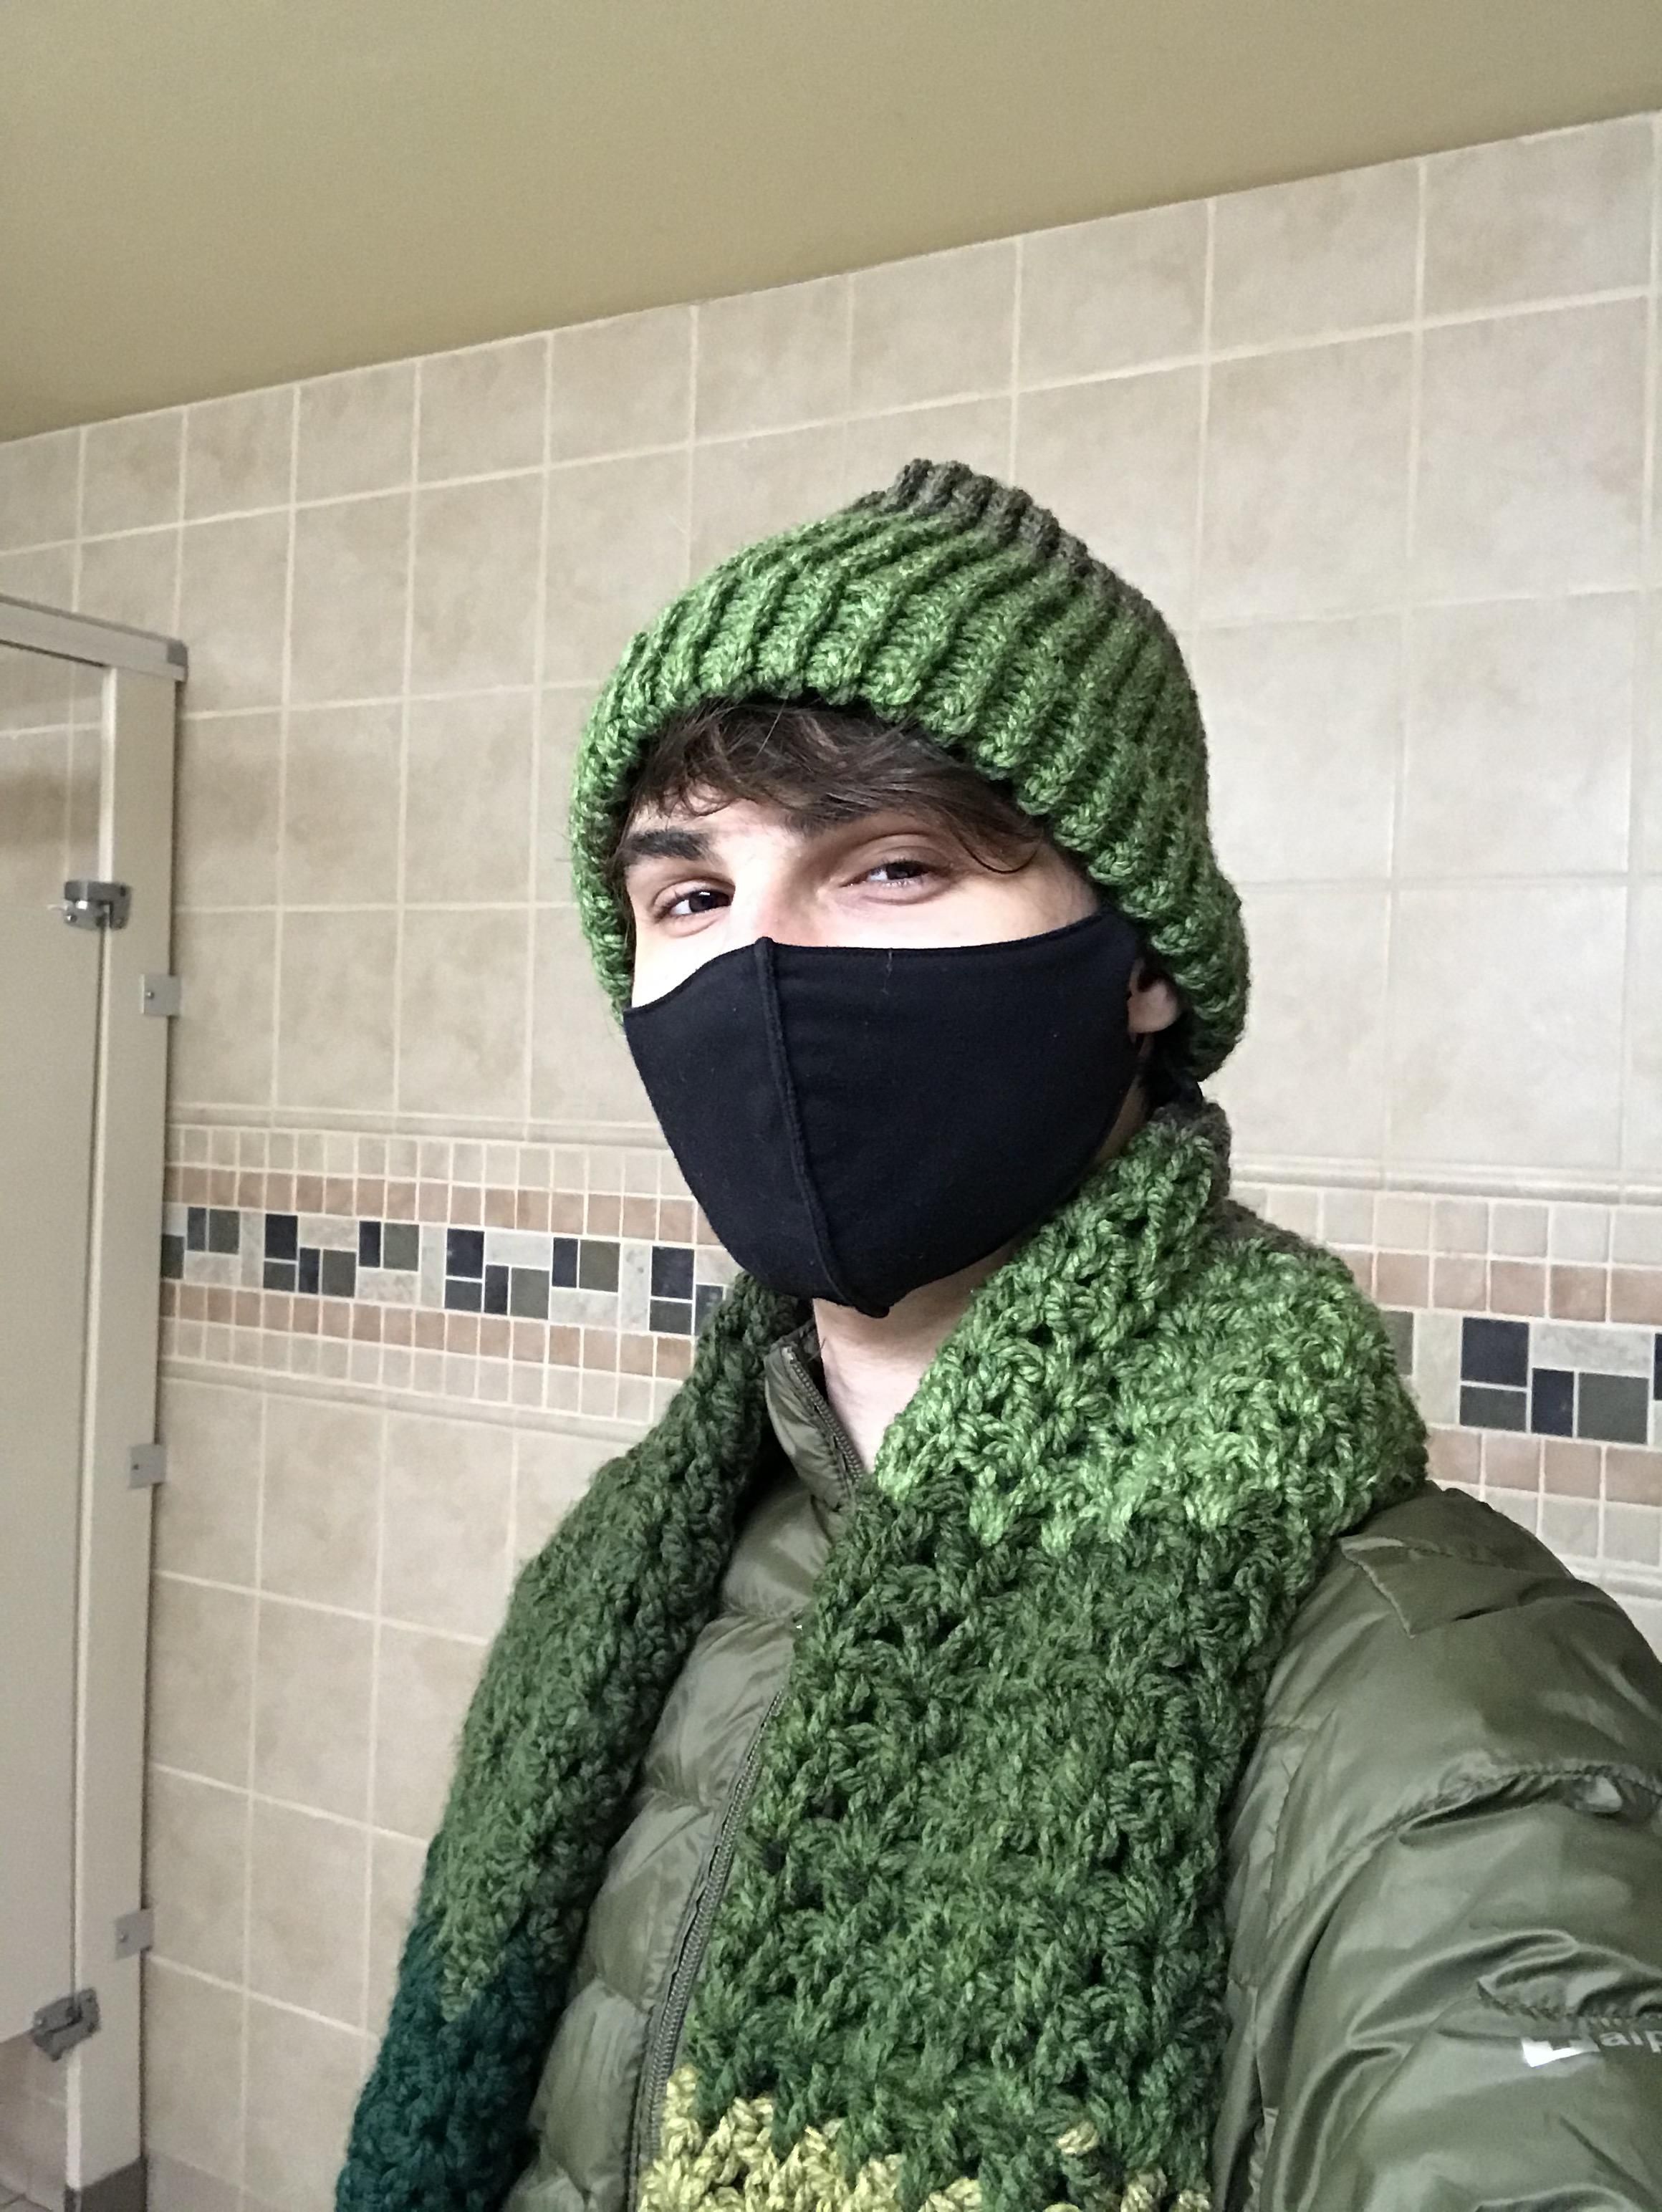 Ive been biking to work in the cold every morning, my co-worker noticed and knitted me a scarf and beanie.